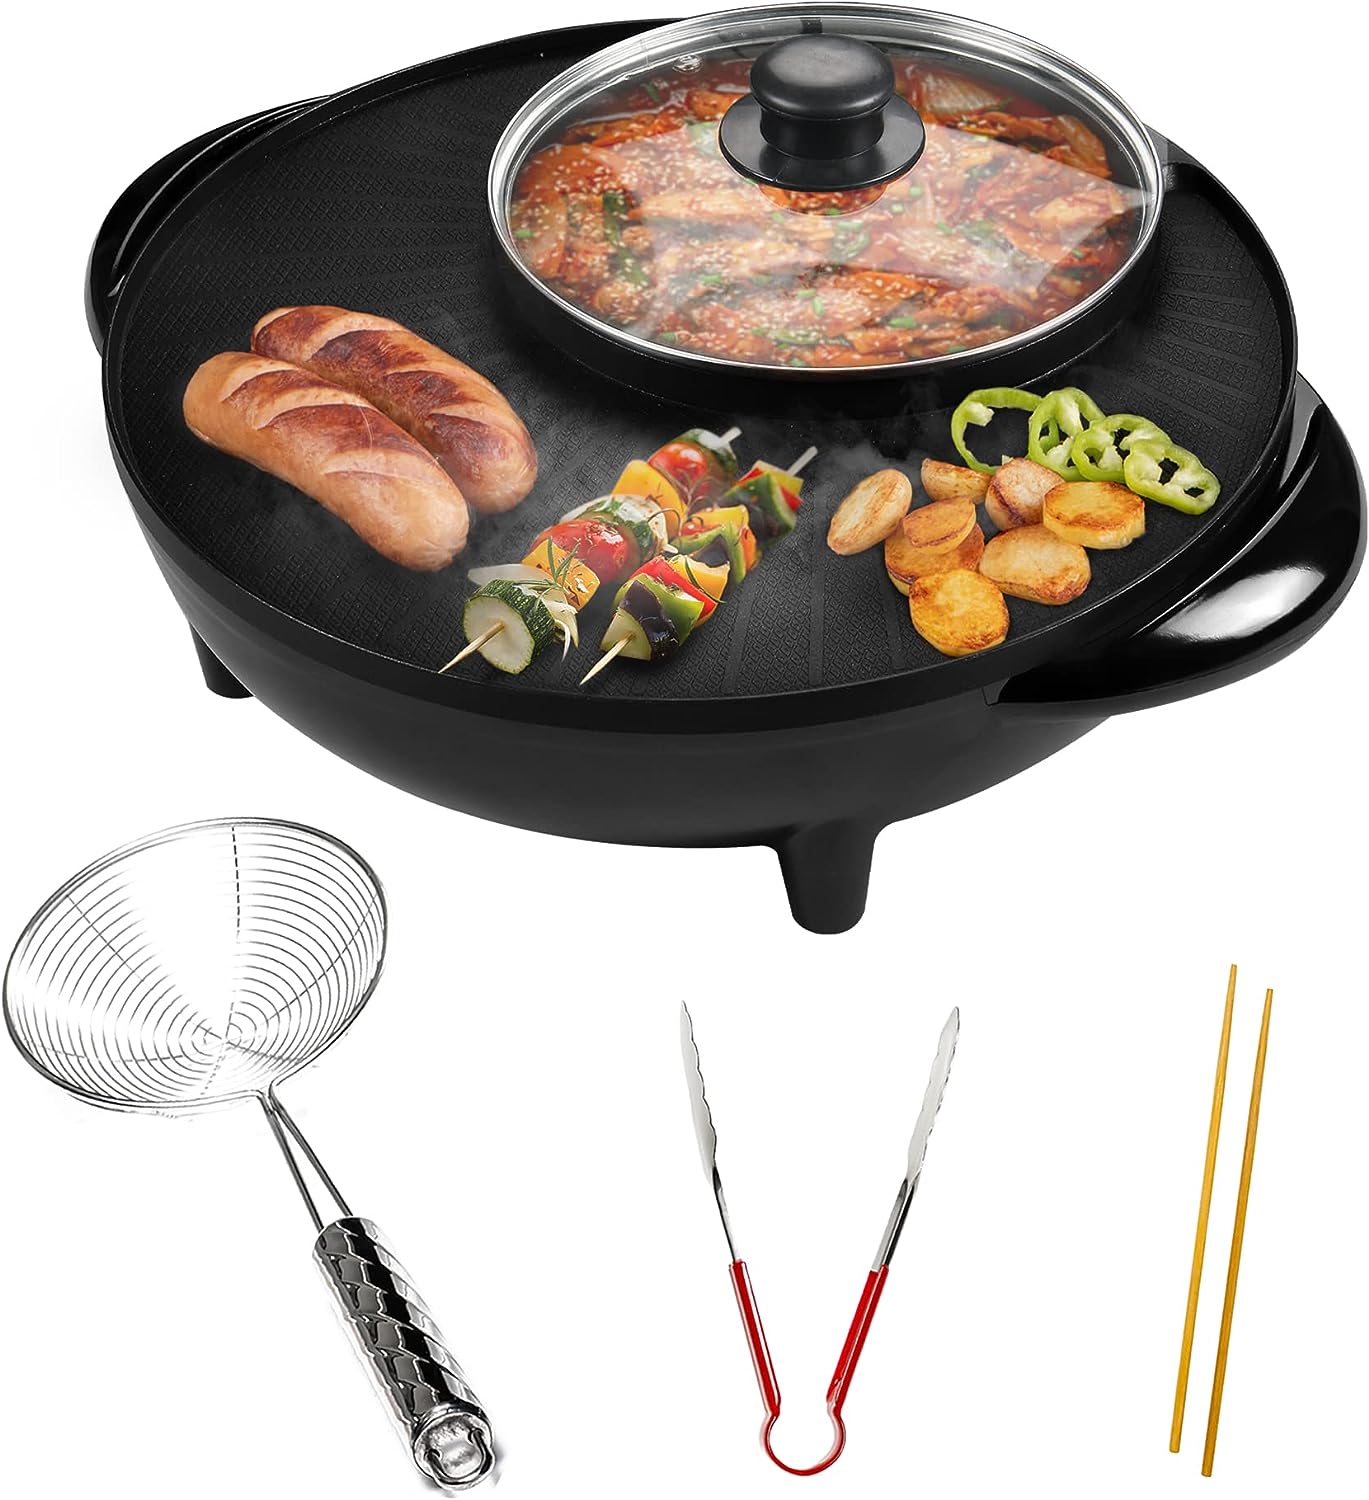 Household Electric Baking Pan Hot Pot - China Hotpot and Electric